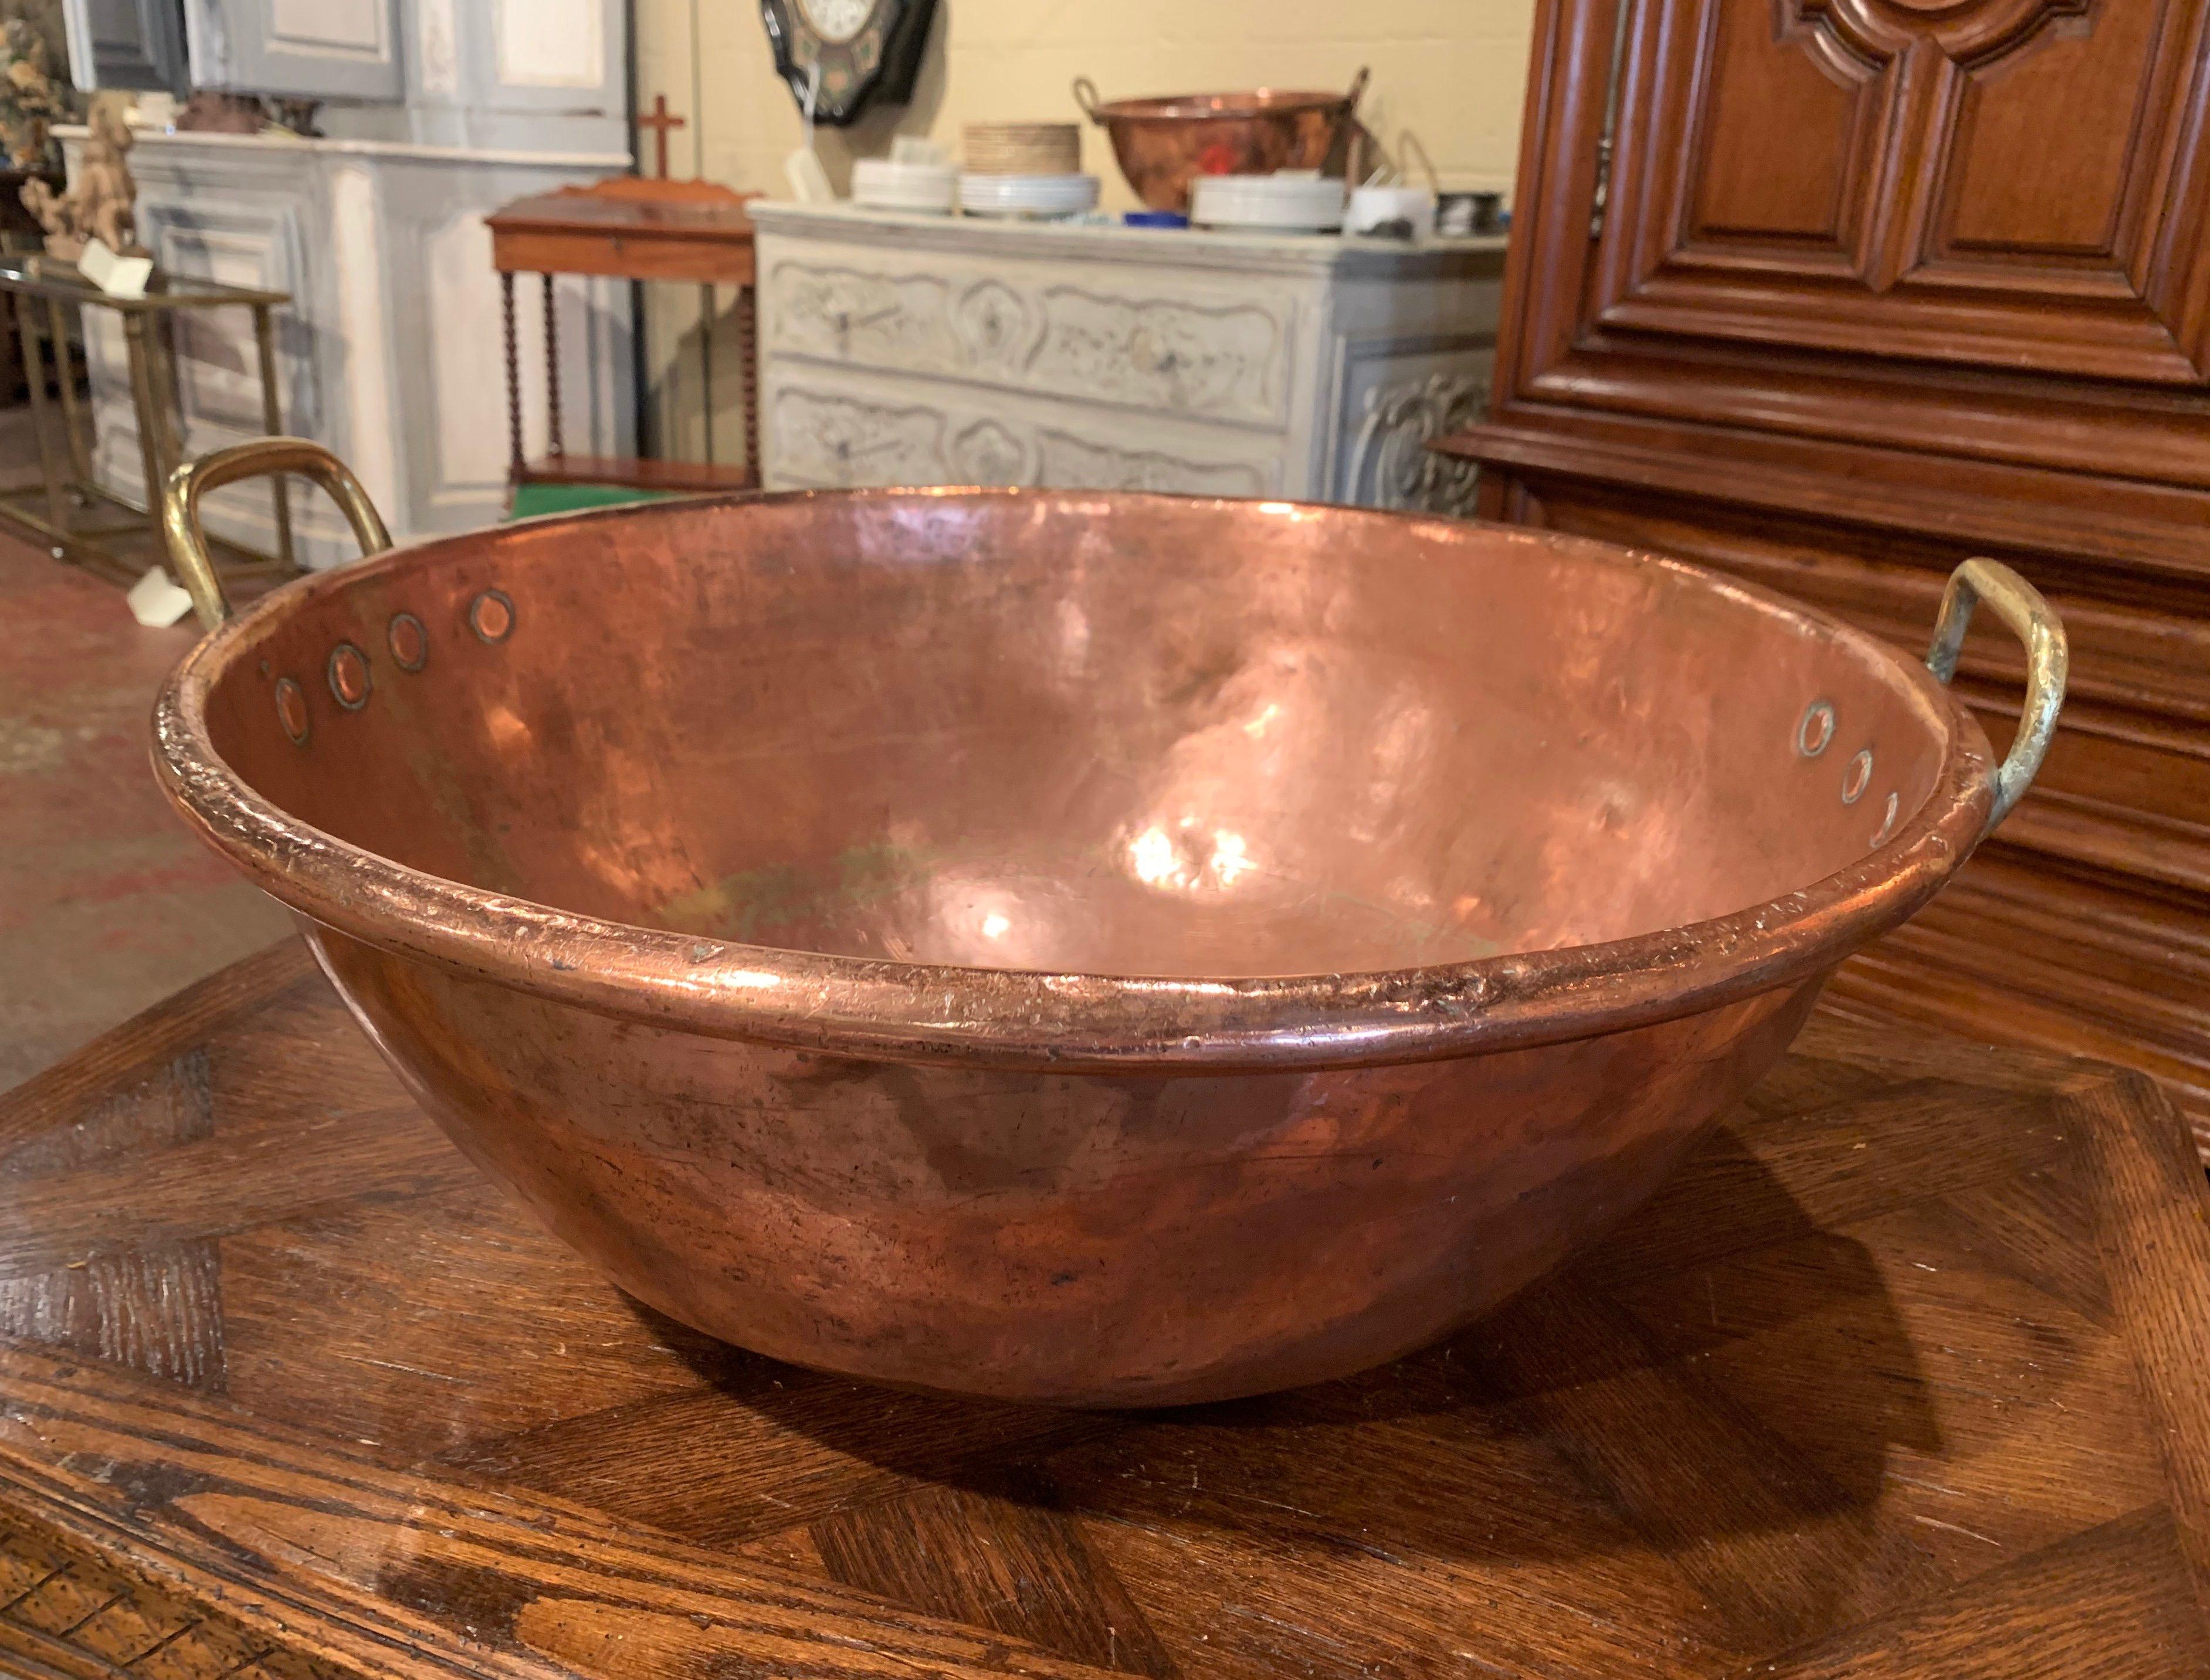 Keep your wine or beer chilled in style with this large elegant round bowl; crafted in Northern France circa 1870 and originally used for homemade jelly, the circular copper bowl with rounded rim is dressed with brass side handles attached with